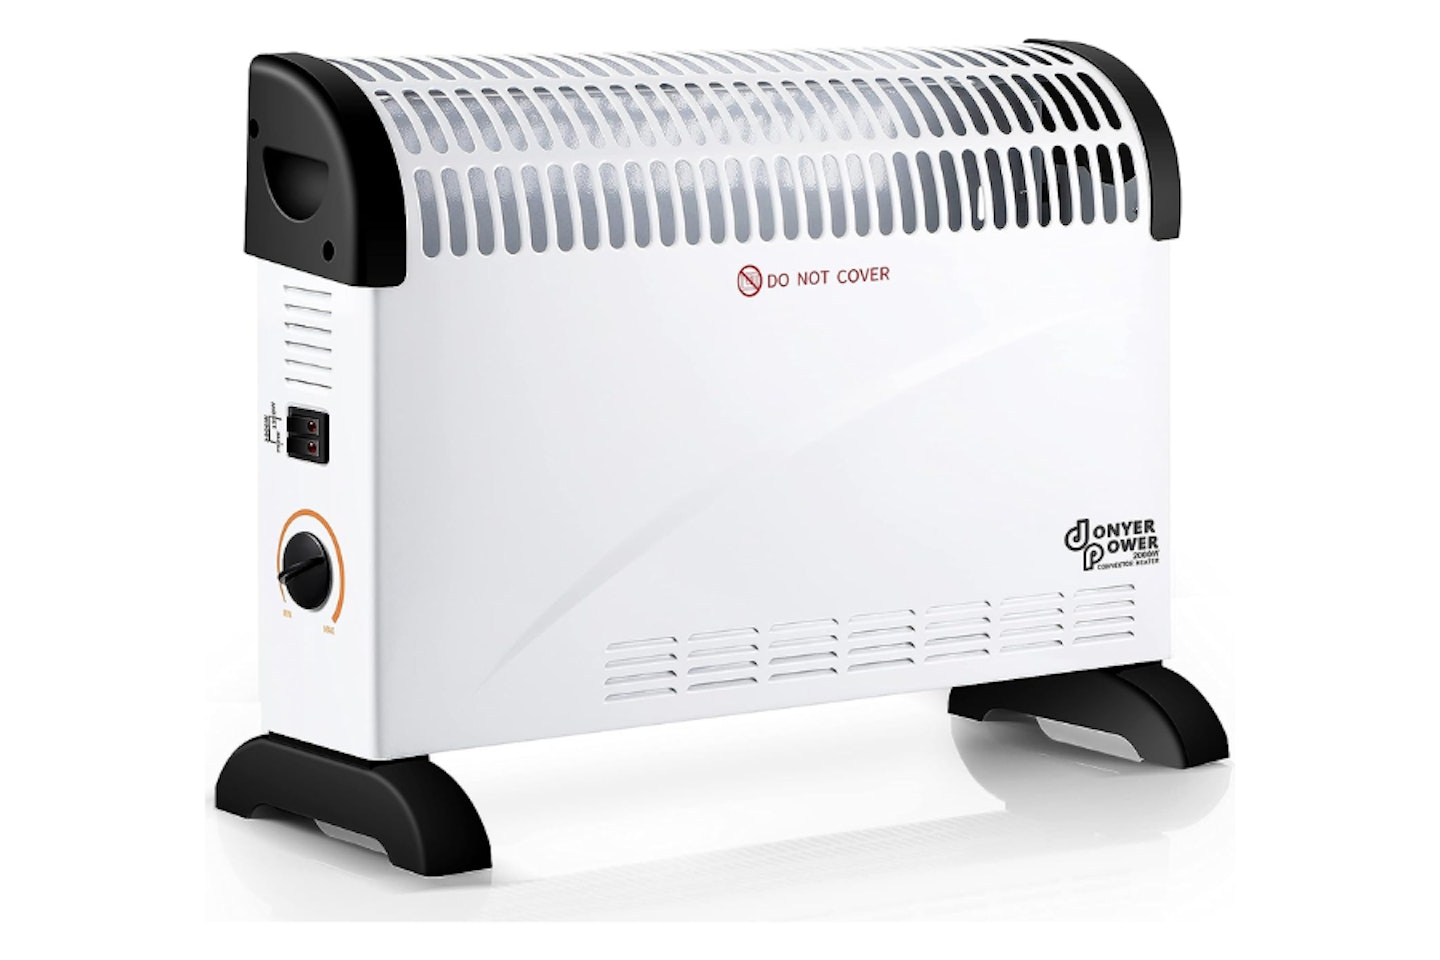 DONYER POWER Convector Heater